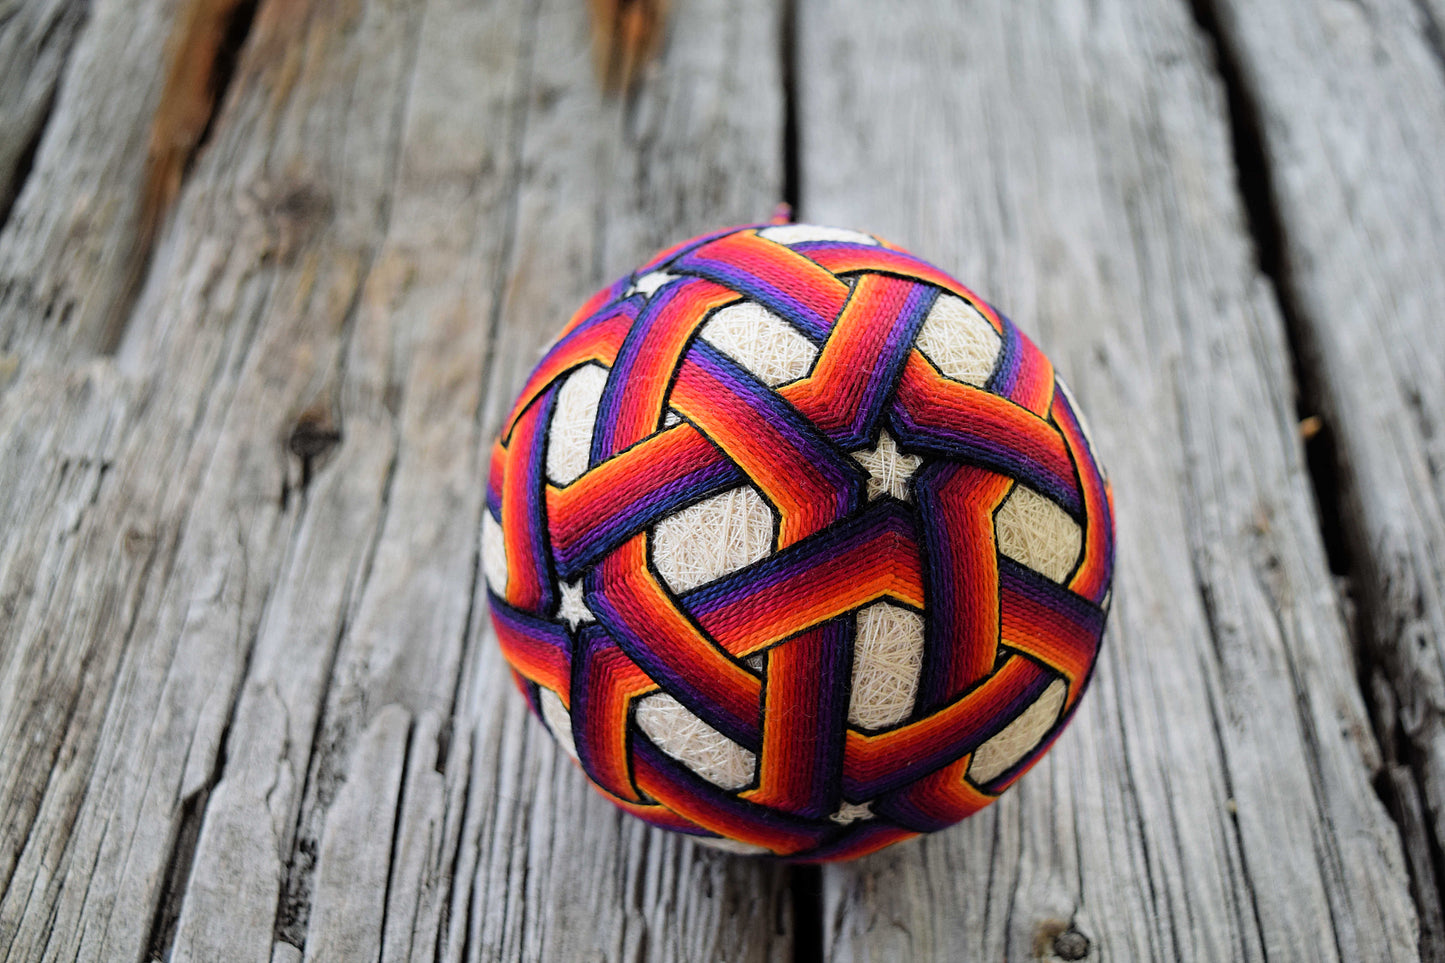 Temari ball embroidered with ombre star pattern in yellow, orange, red, purple, blue, and black